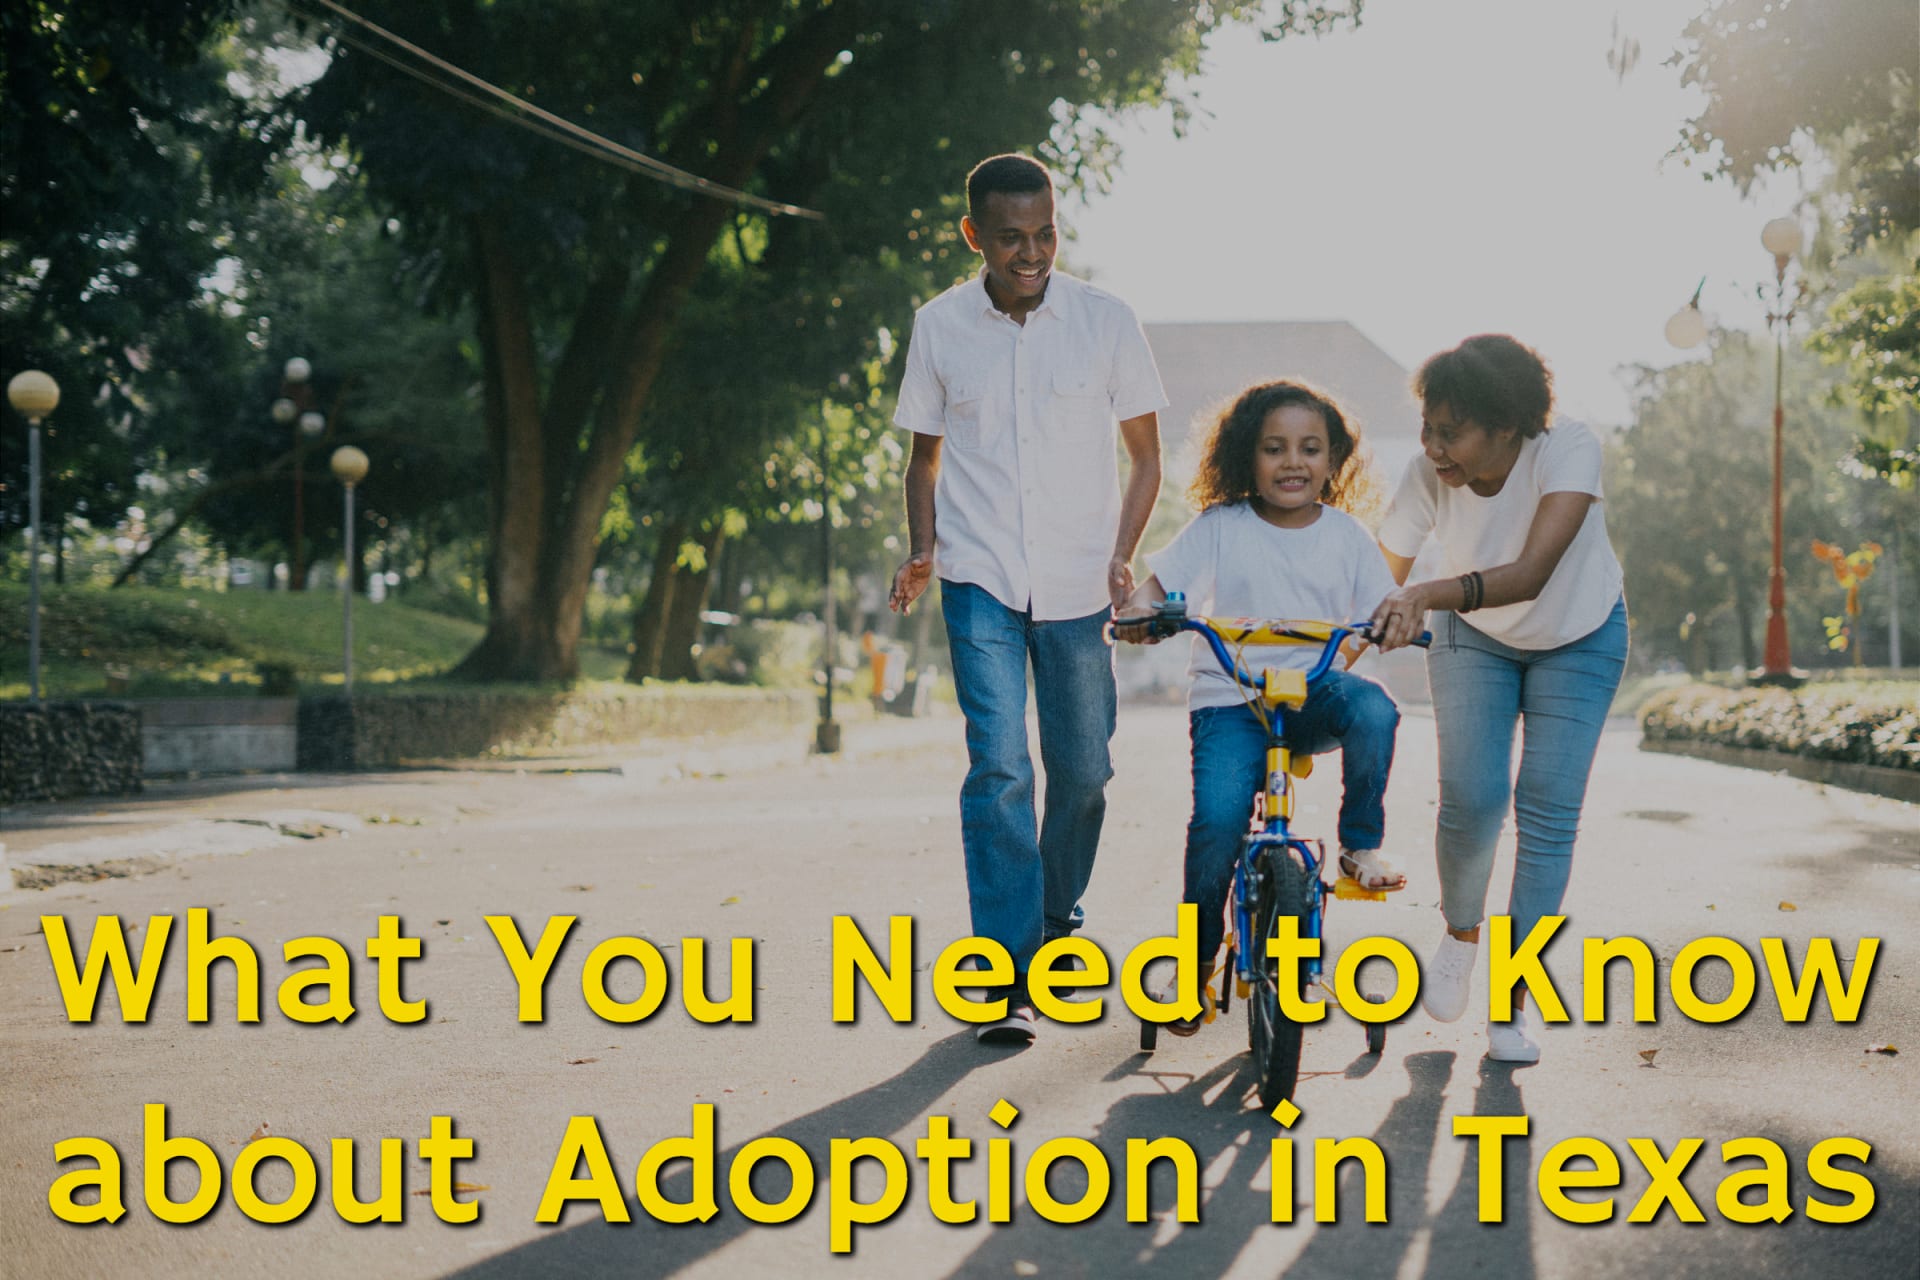 A family made possible through adoption in Texas